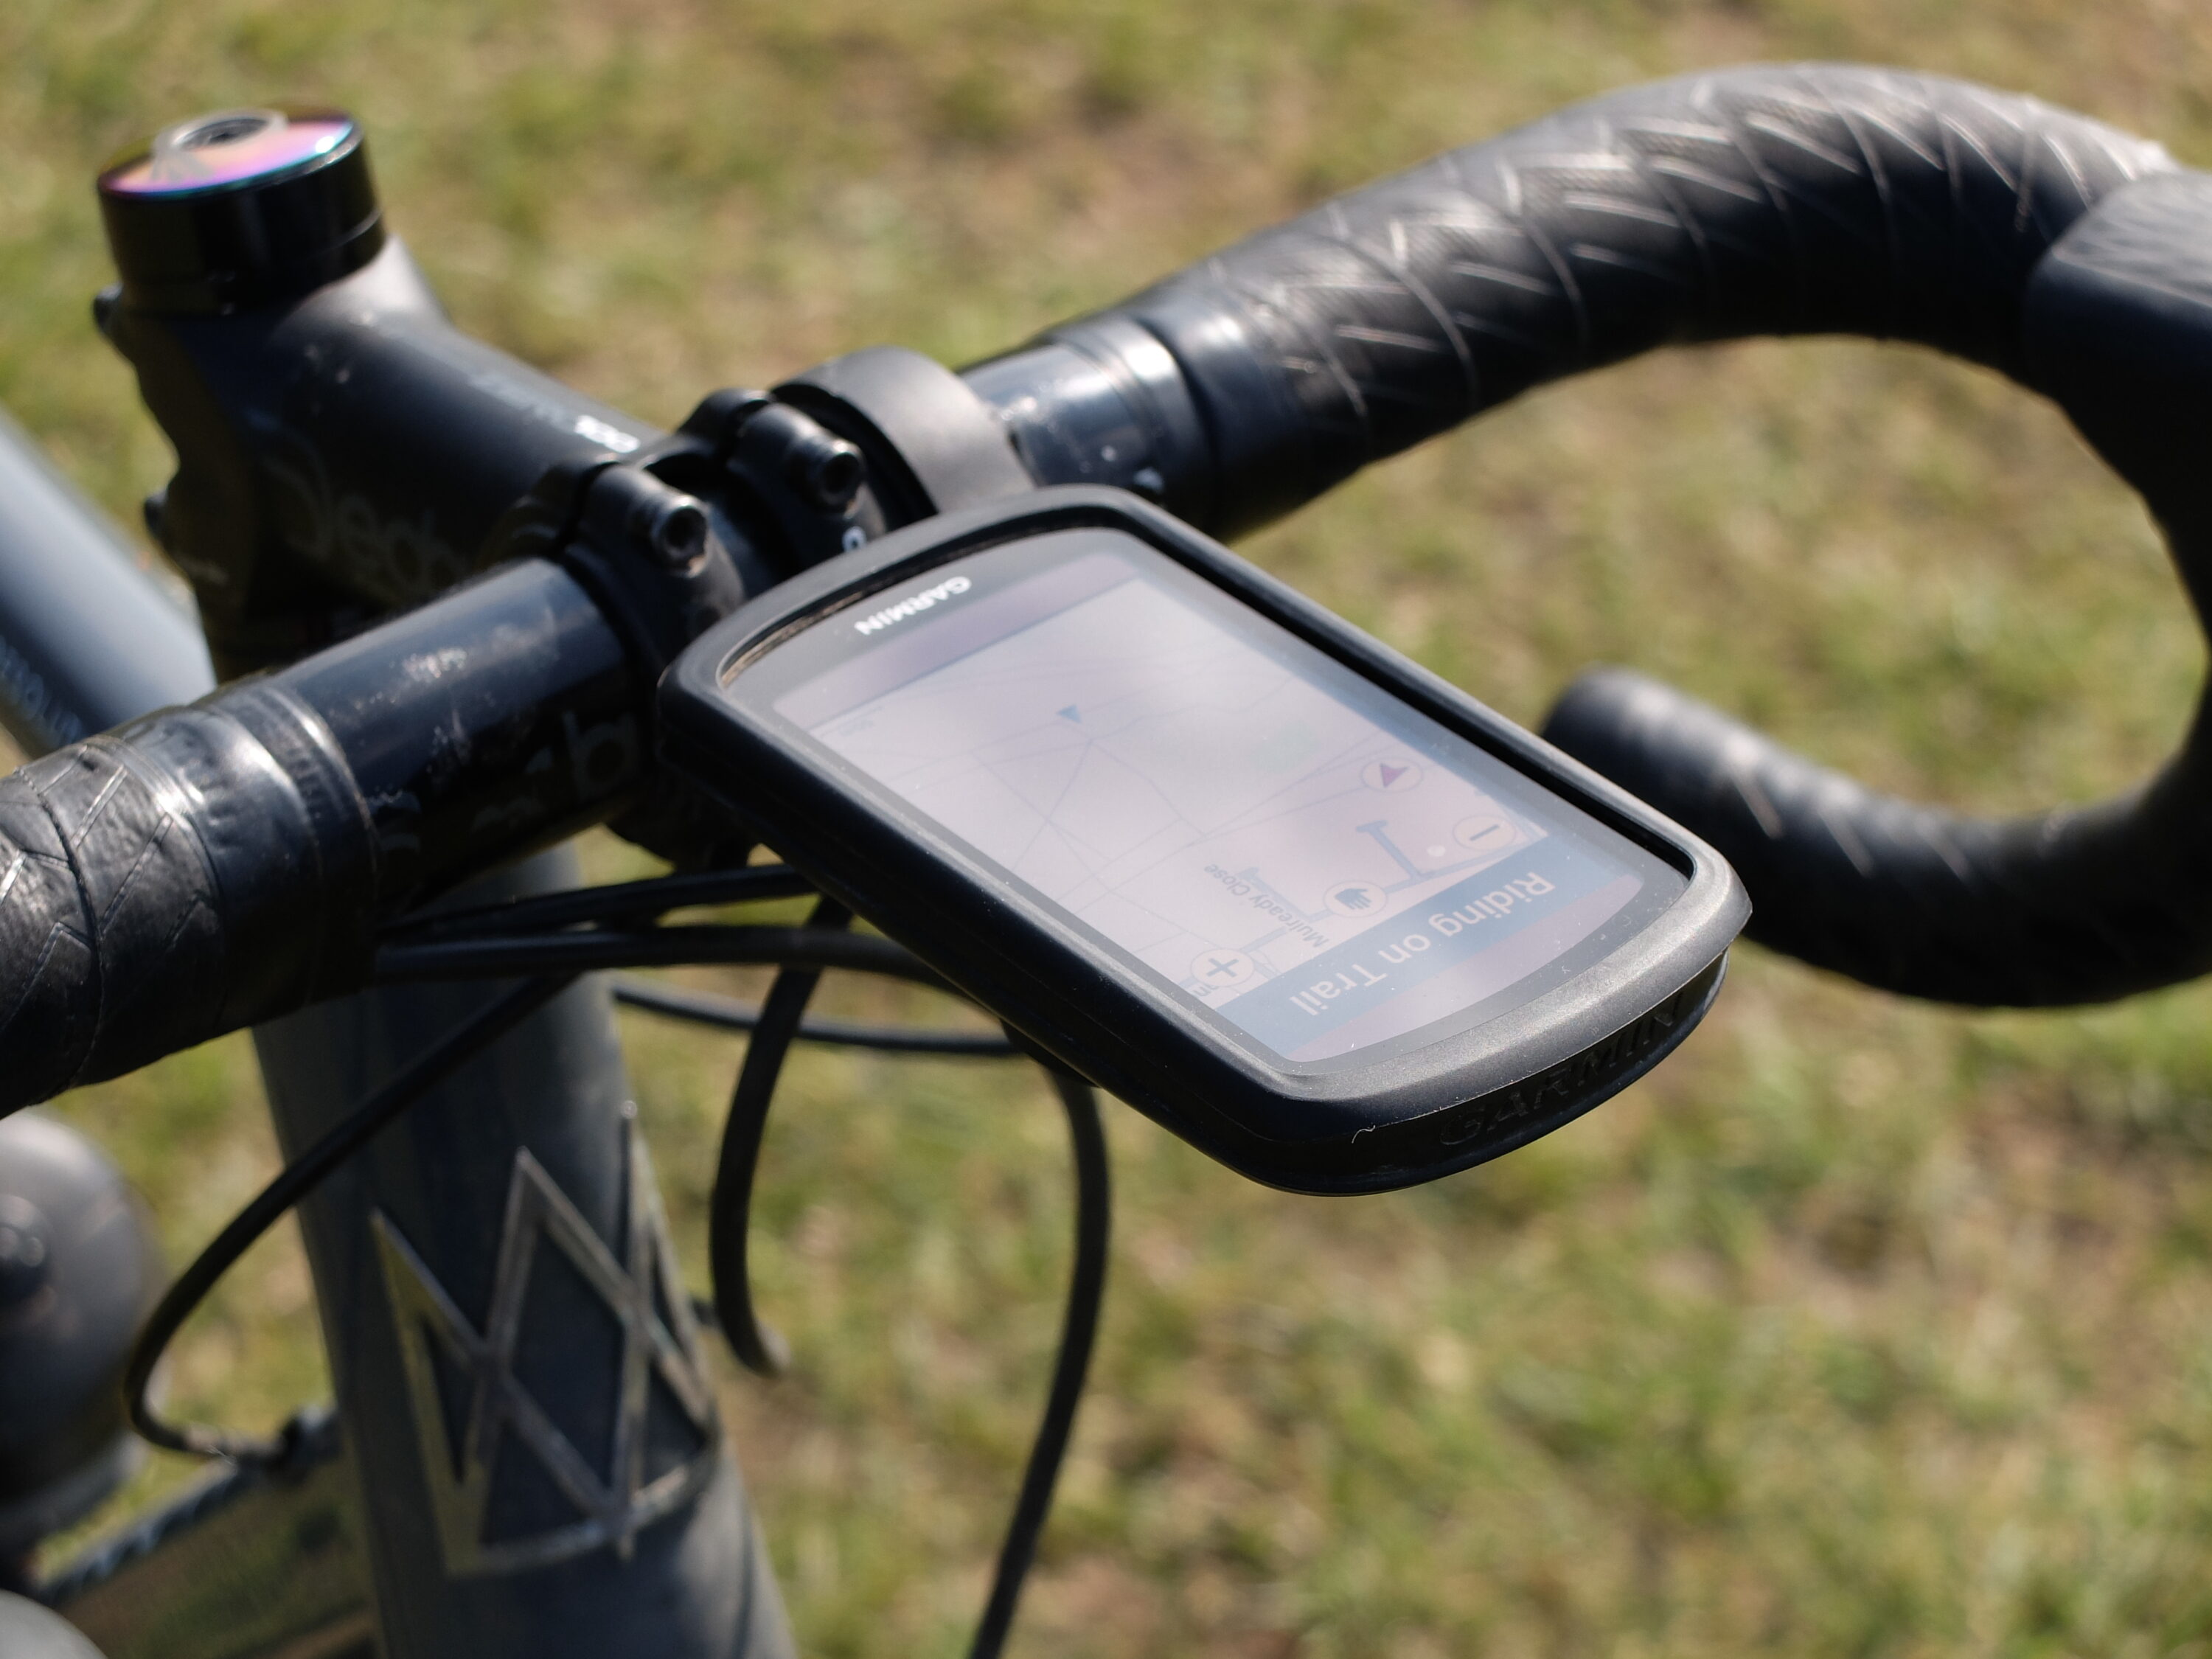 First Impressions: Garmin's new $750 Edge 1040 Solar is much more than a  cycling computer - Bikerumor